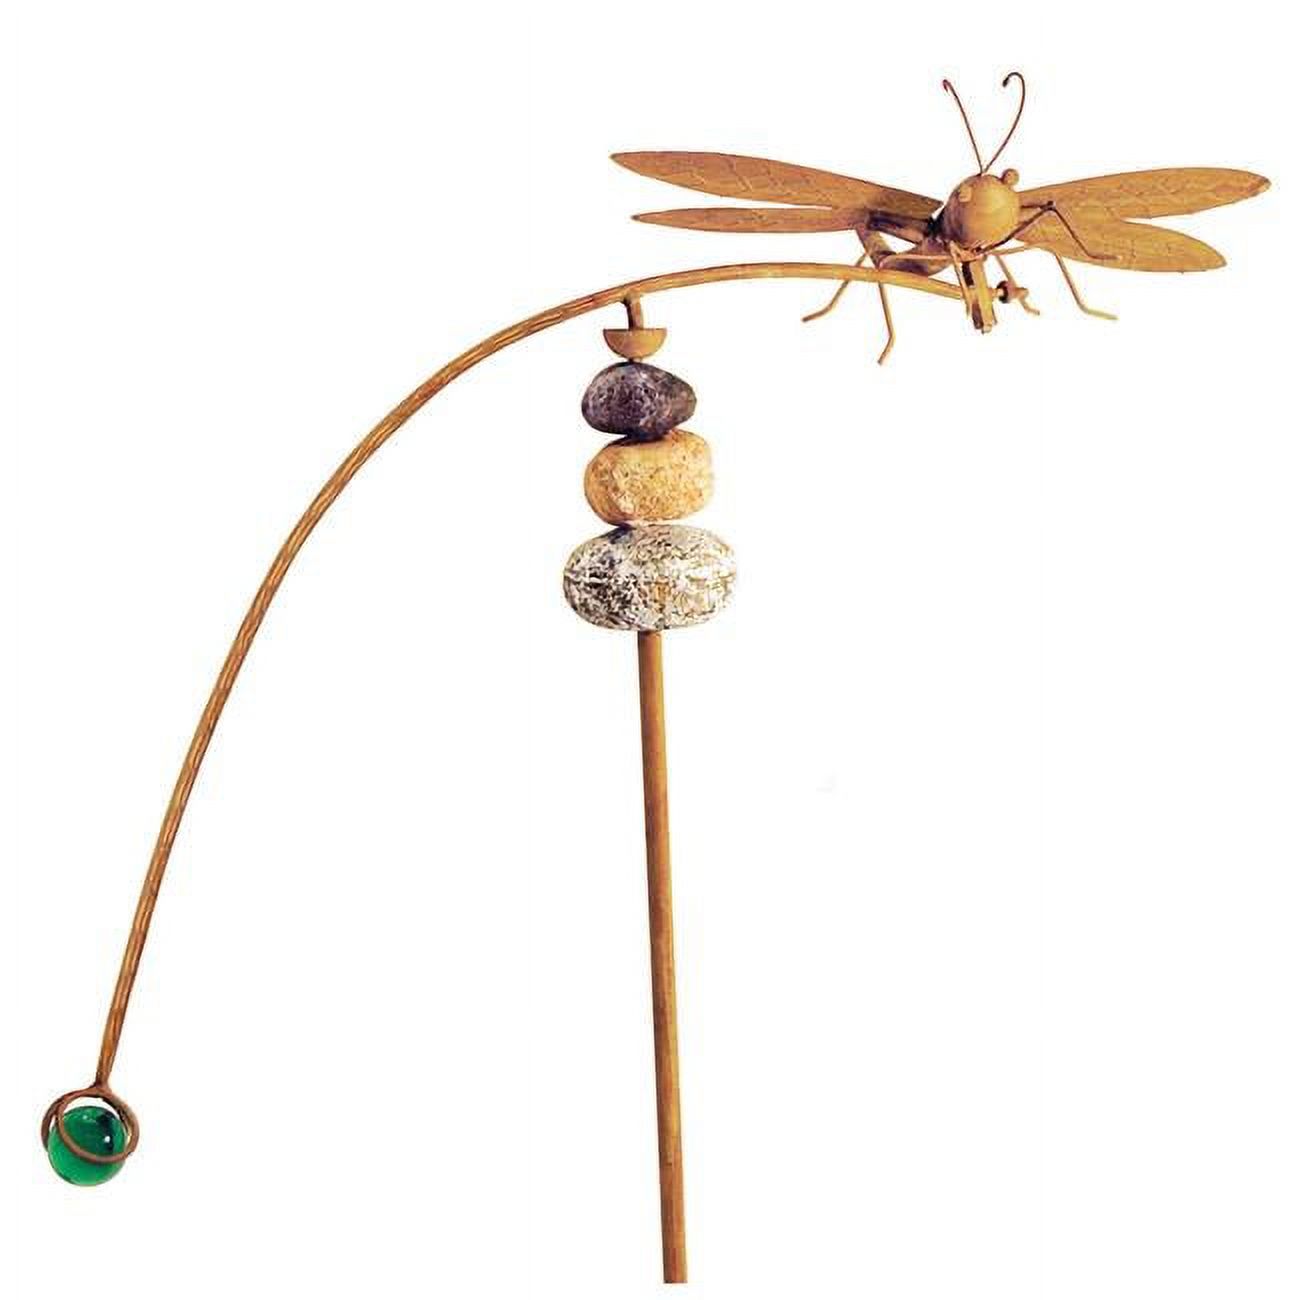 Balancer with Stones Dragonfly Kinetic Garden Stake - image 1 of 1